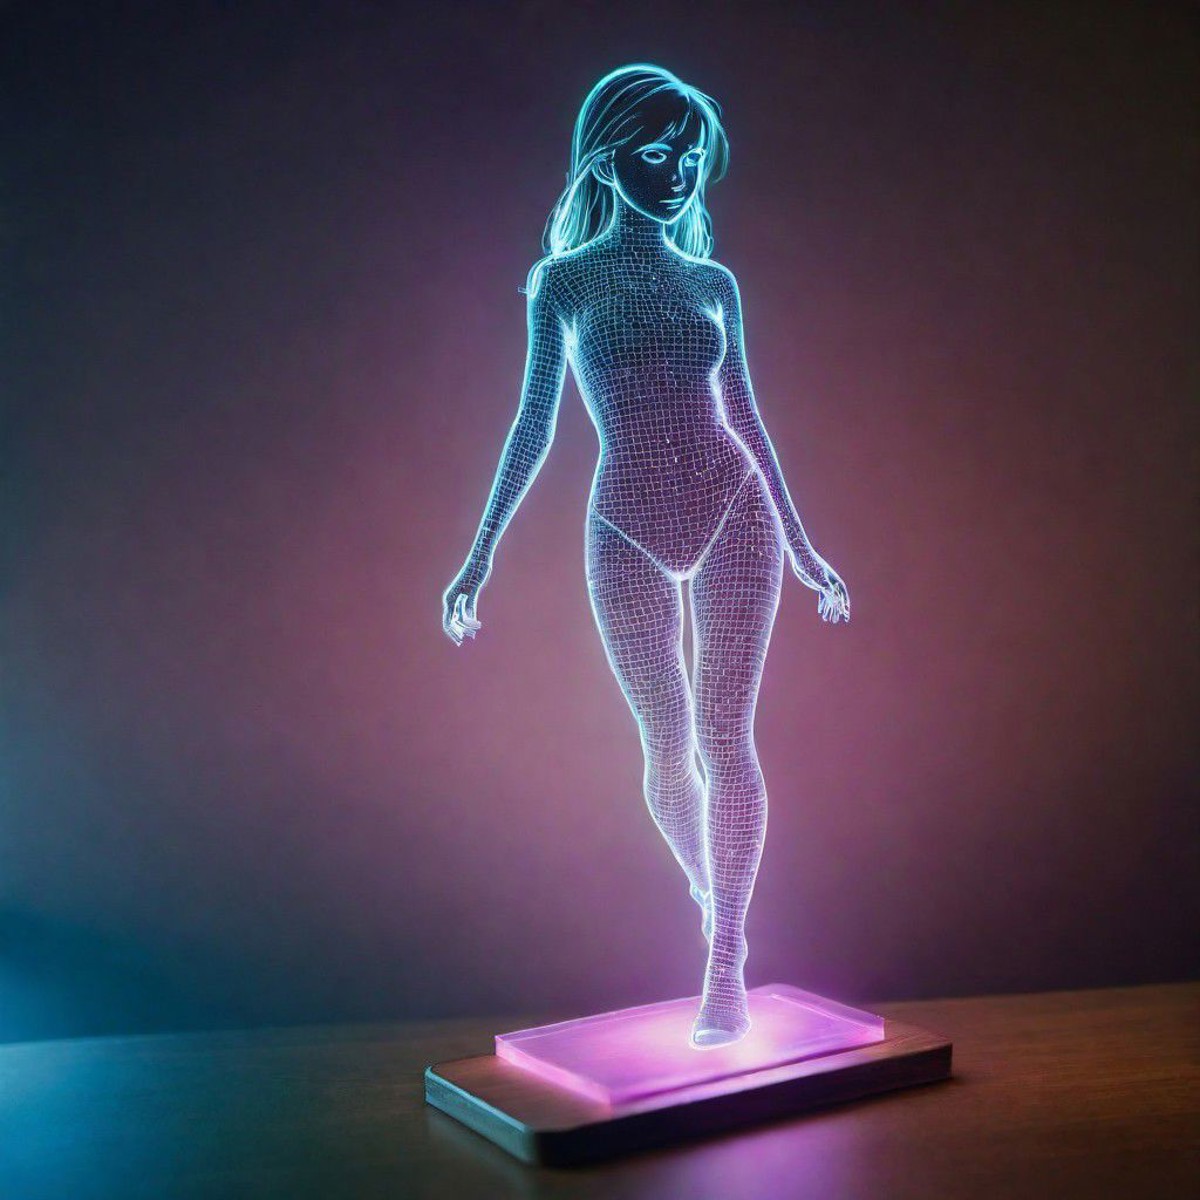 laser hologram of a girl,
on the table, high detail, high resolution